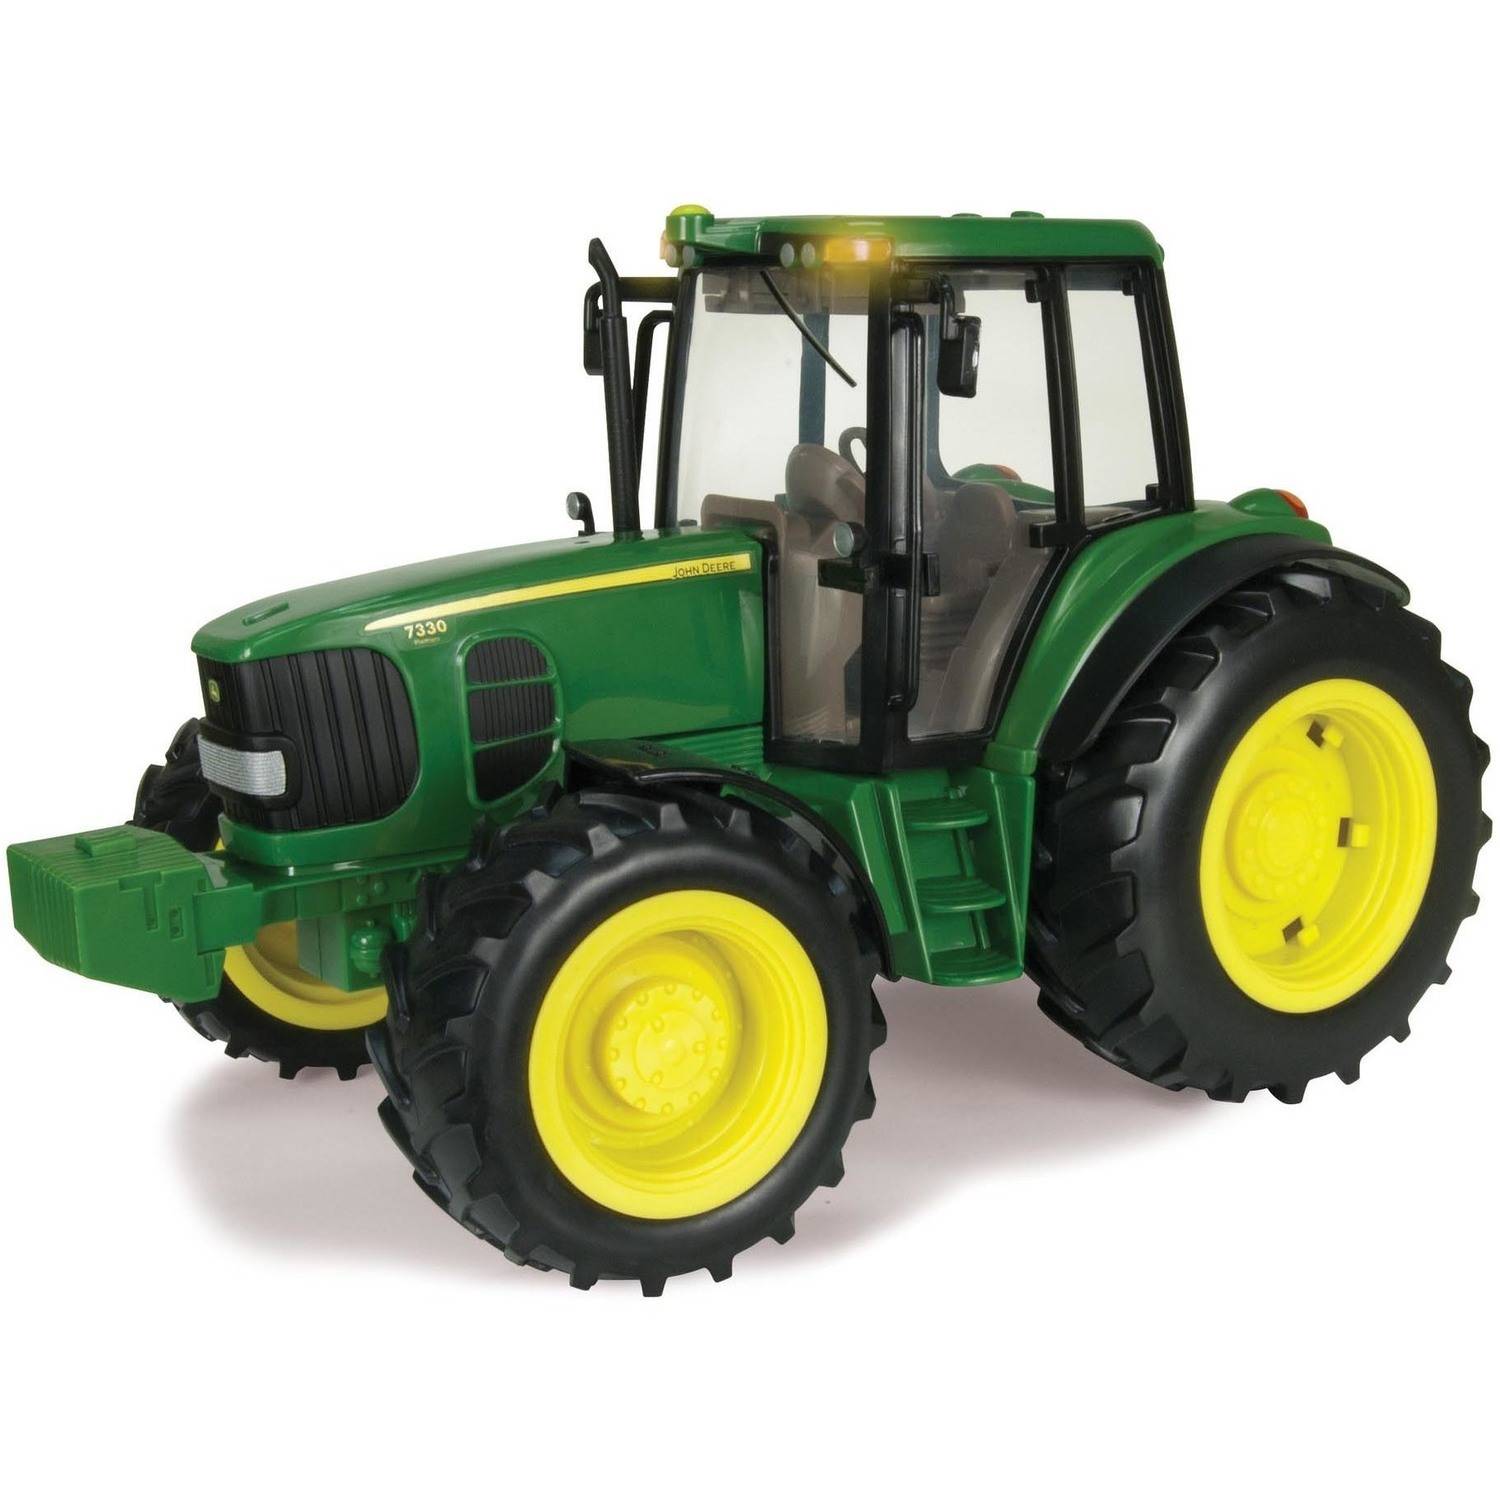 Who Sings Big Green Tractor